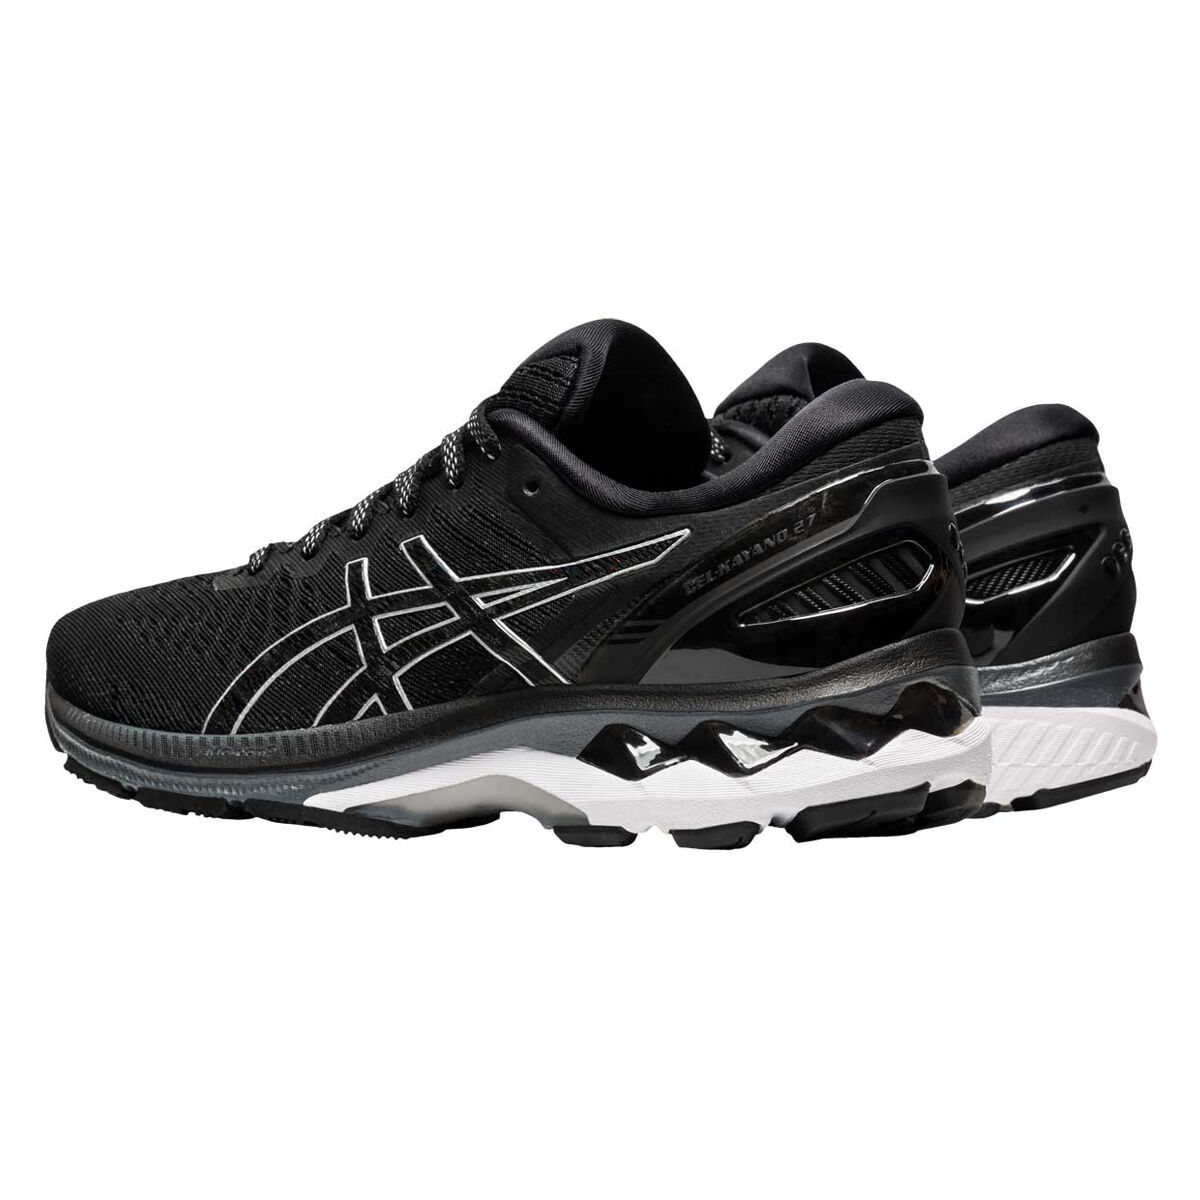 women's asic running shoes sale